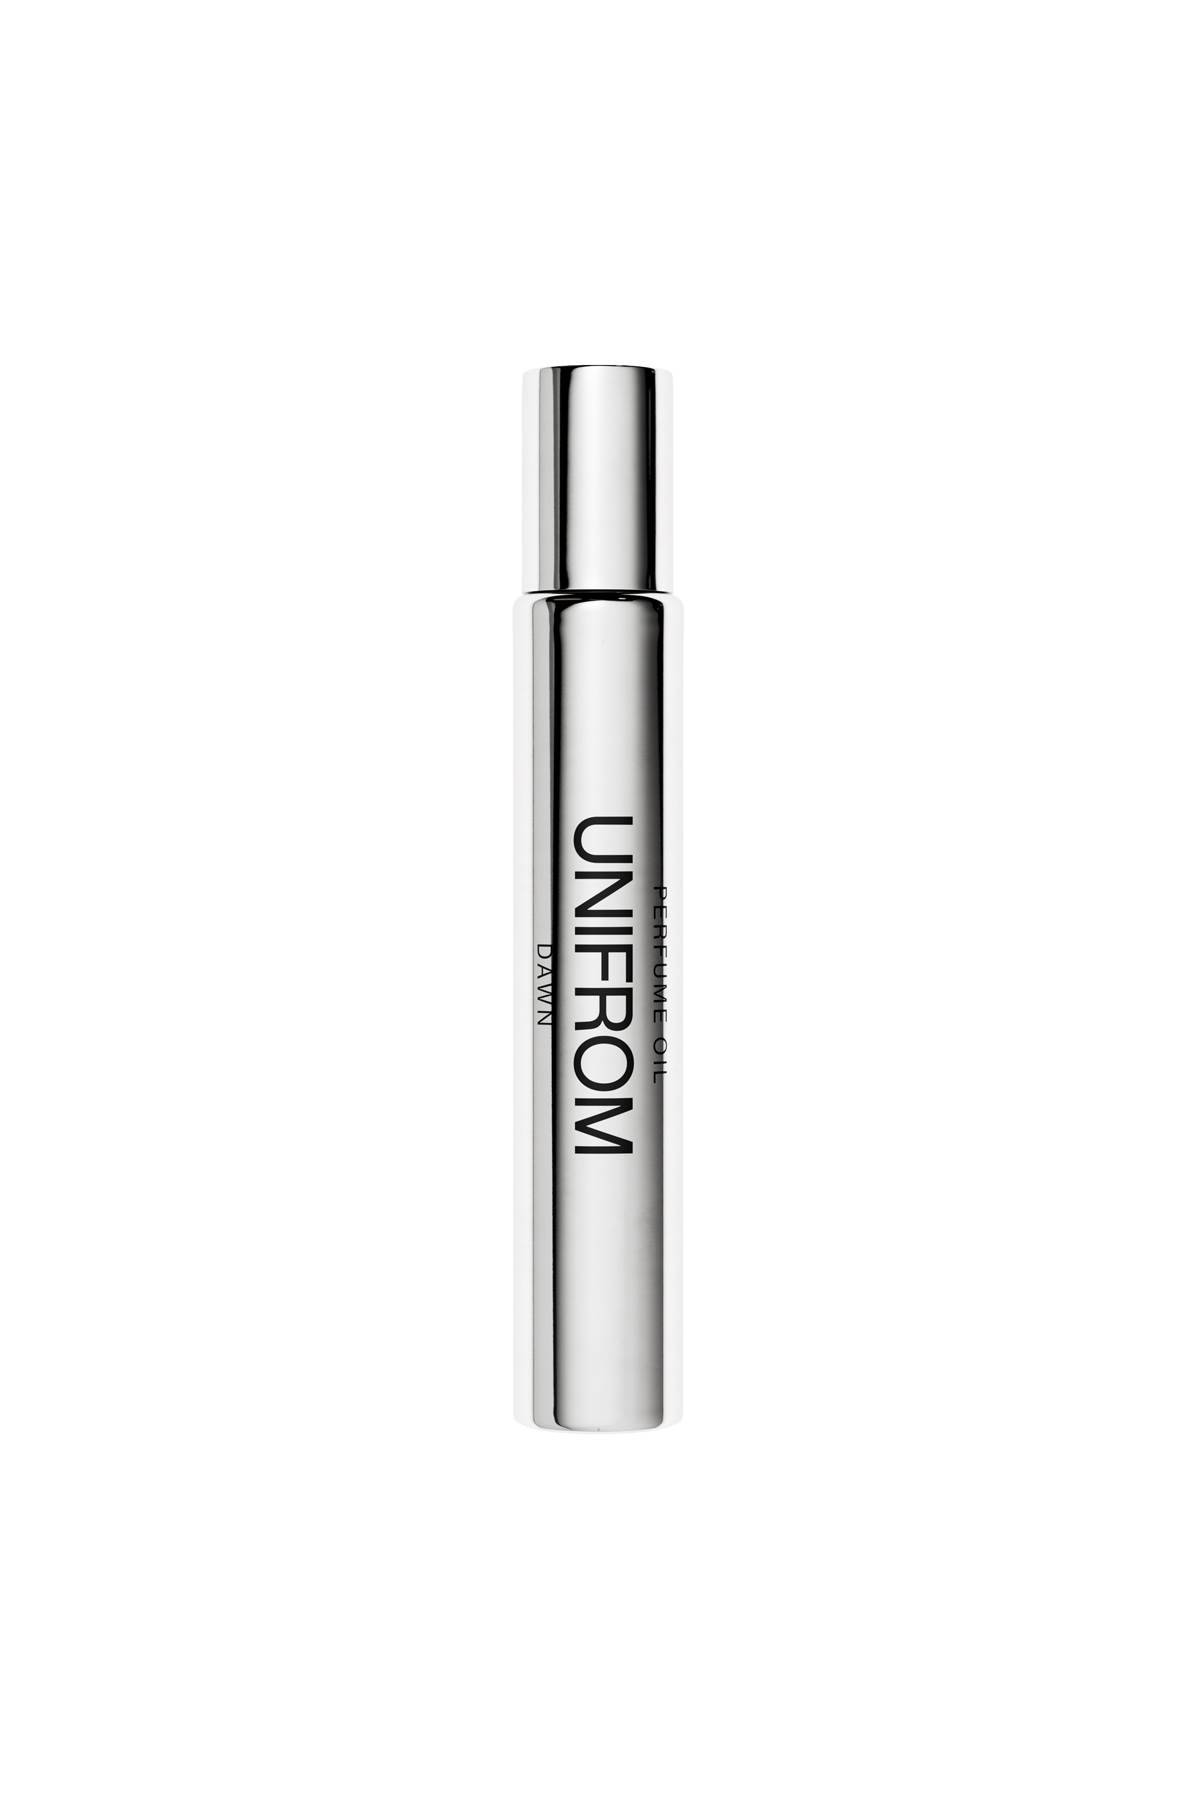 UNIFROM UNIFROM perfume oil dawn - 10ml